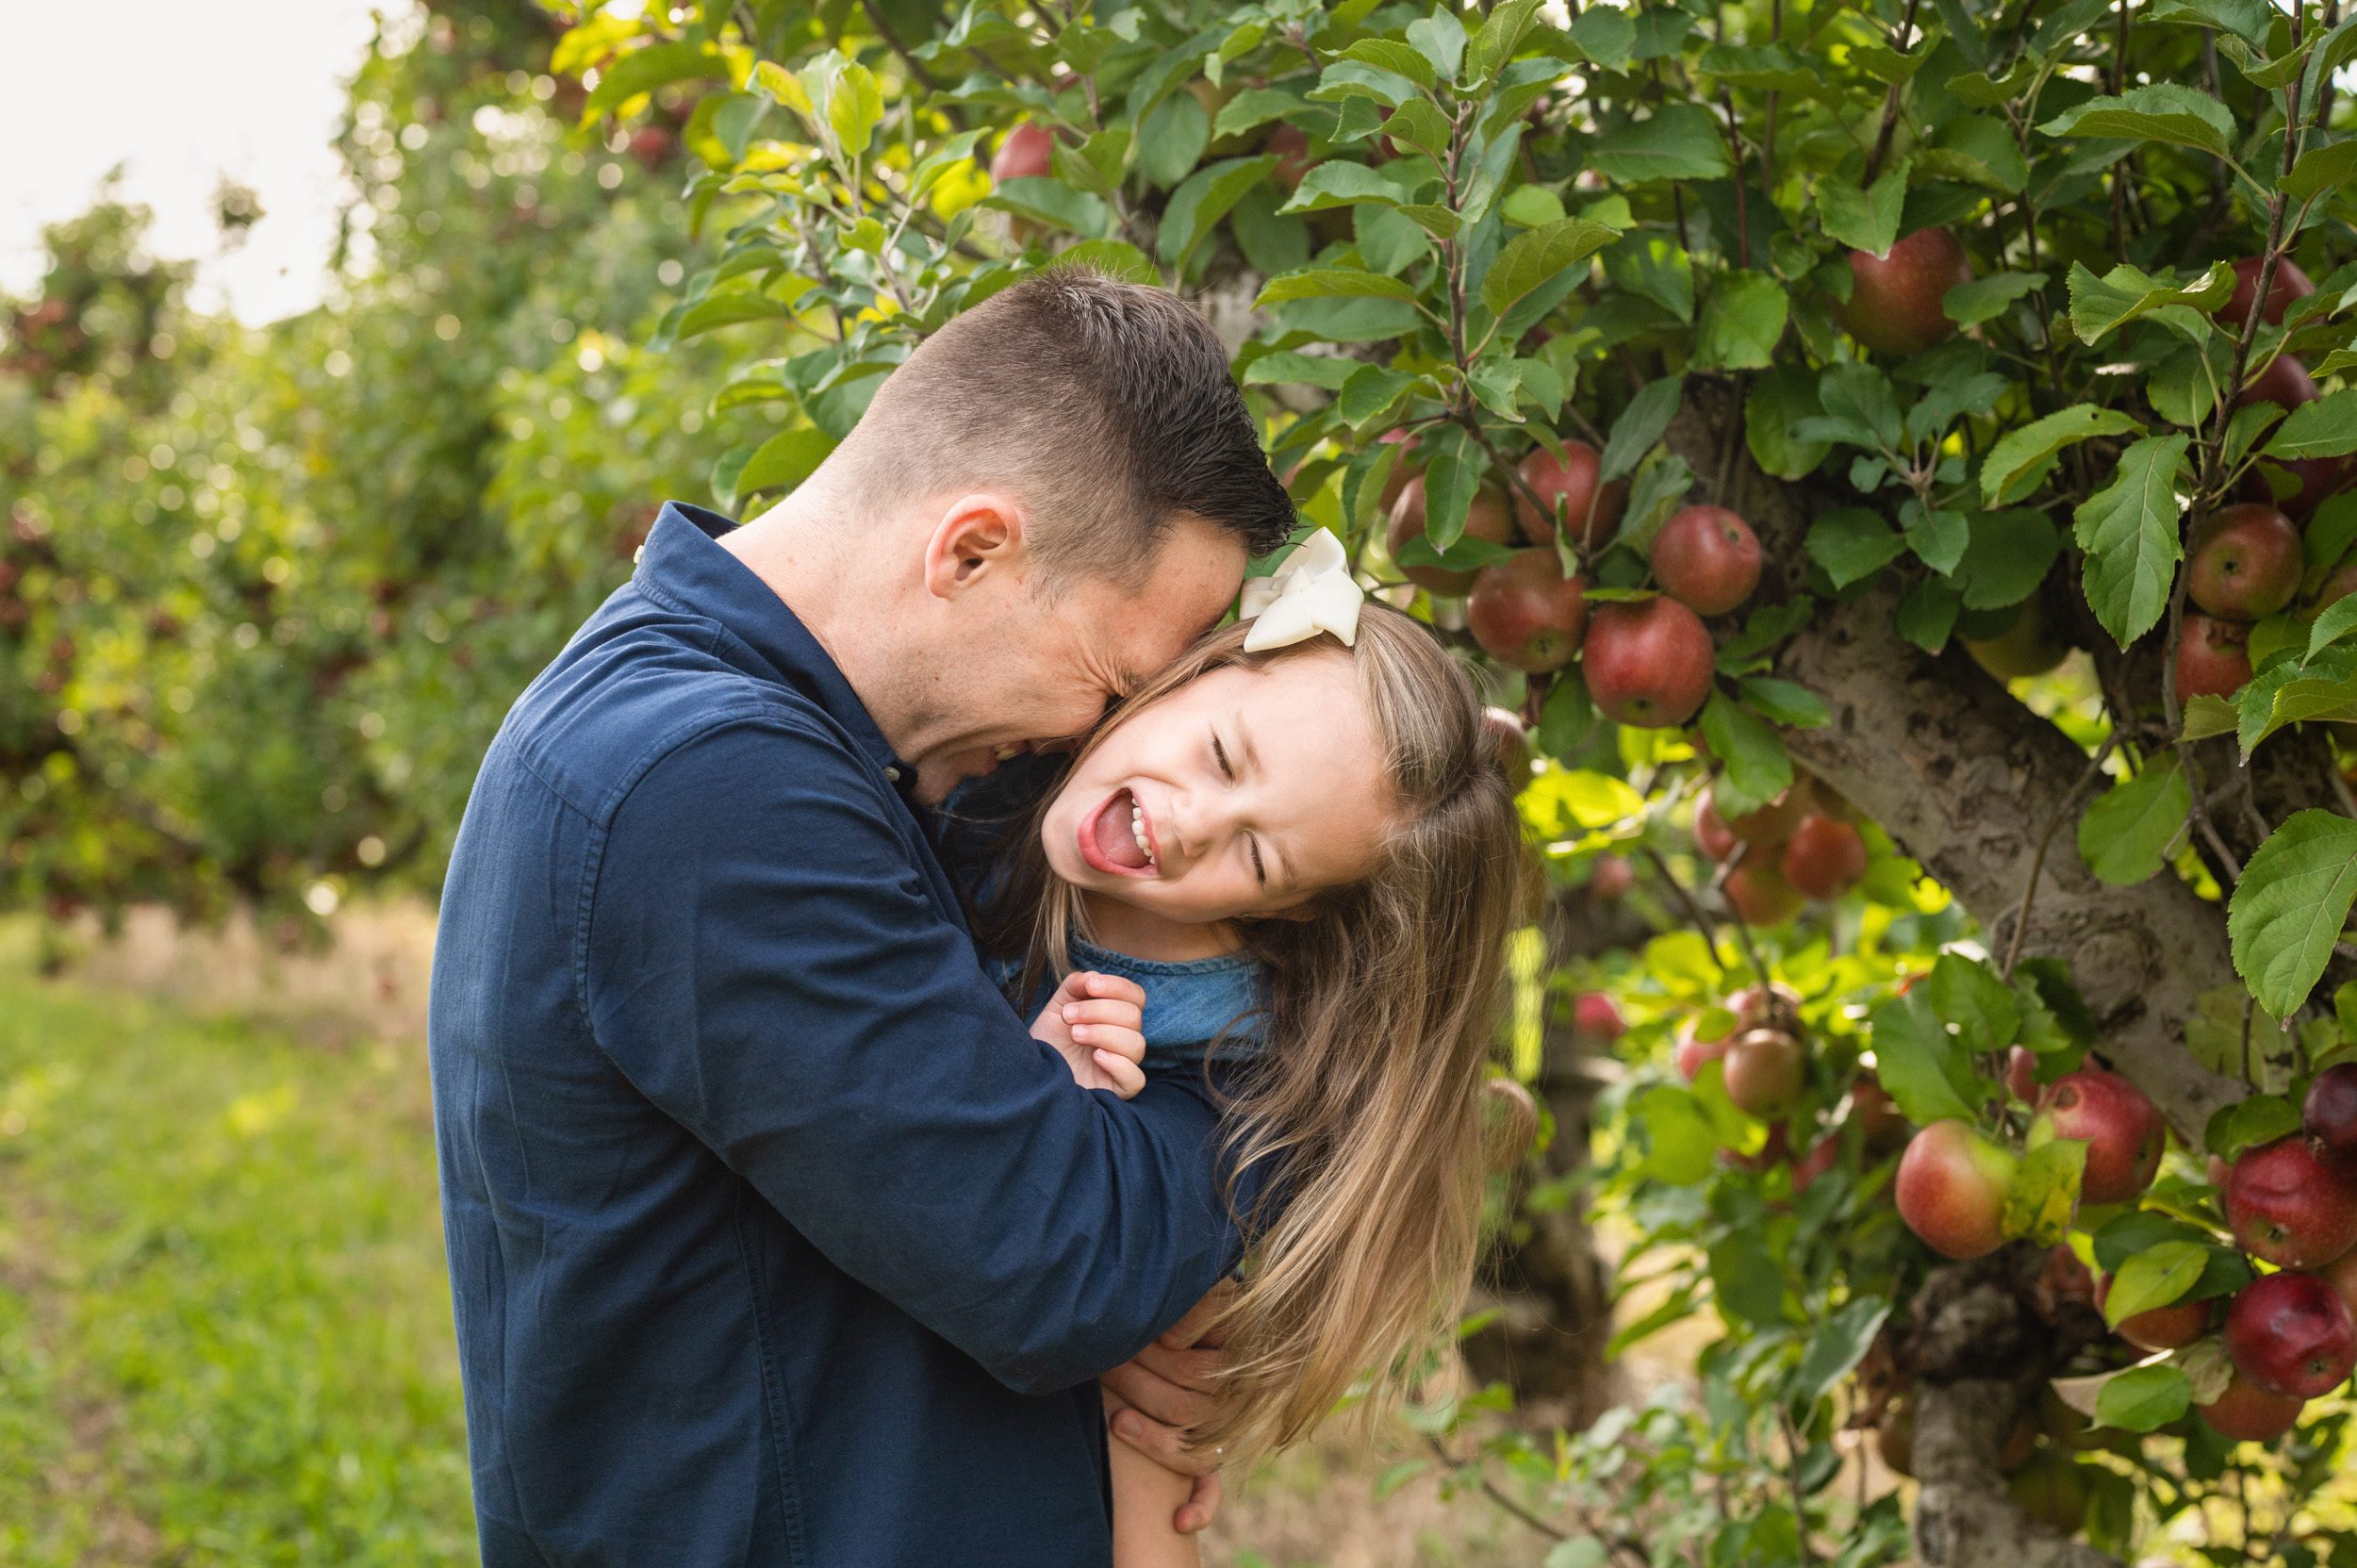 a dad and his daughter laughing together in an apple orchard during a family photo session